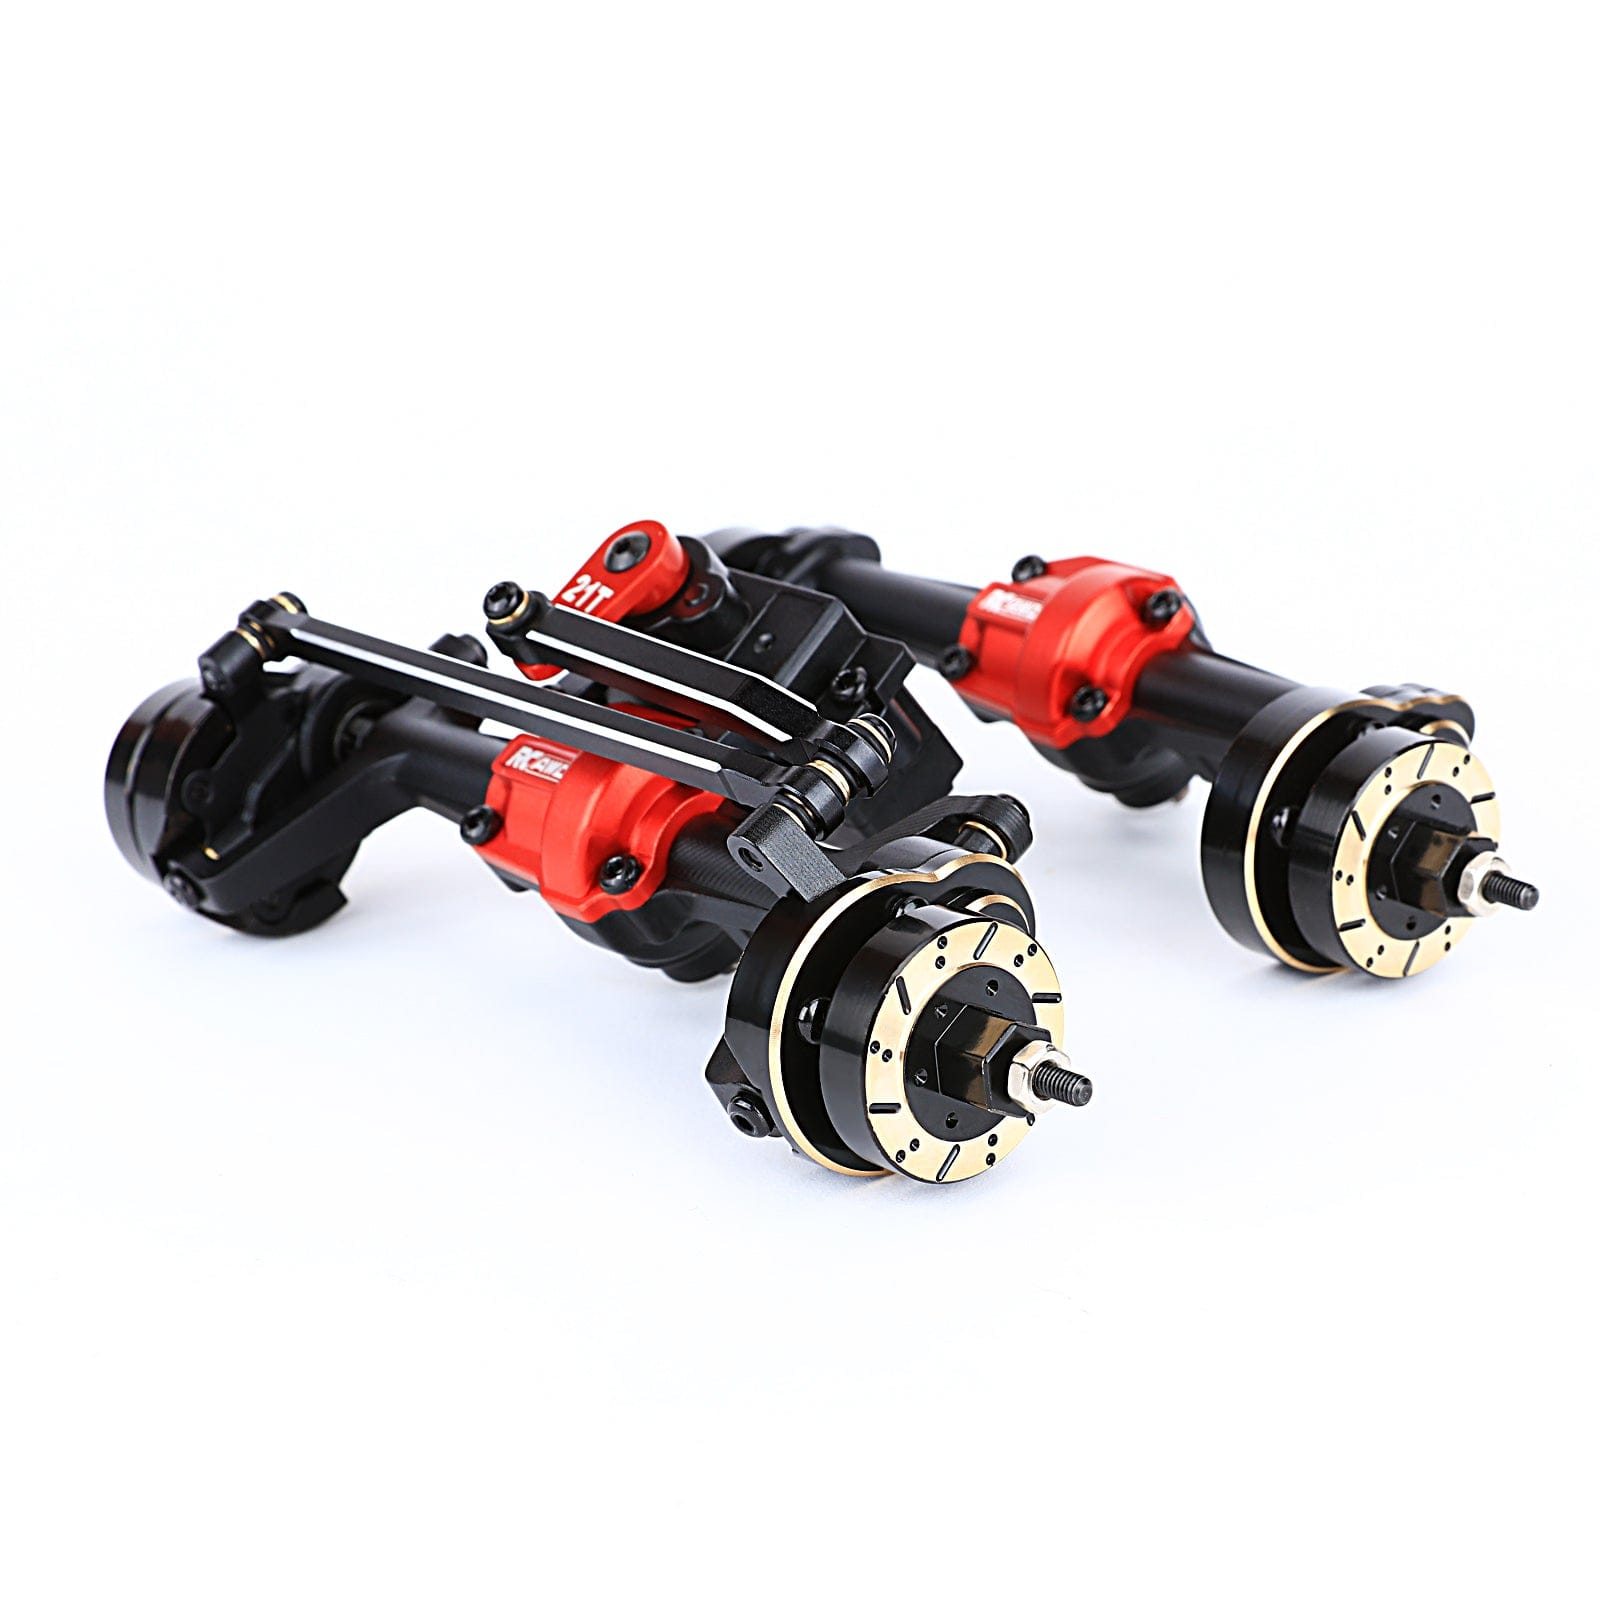 RCAWD HobbyPlus CR18 RCAWD 1/18 HobbyPlus CR18 Upgrades Widen 10mm Reverse Design Portal Axles with Brass Hex